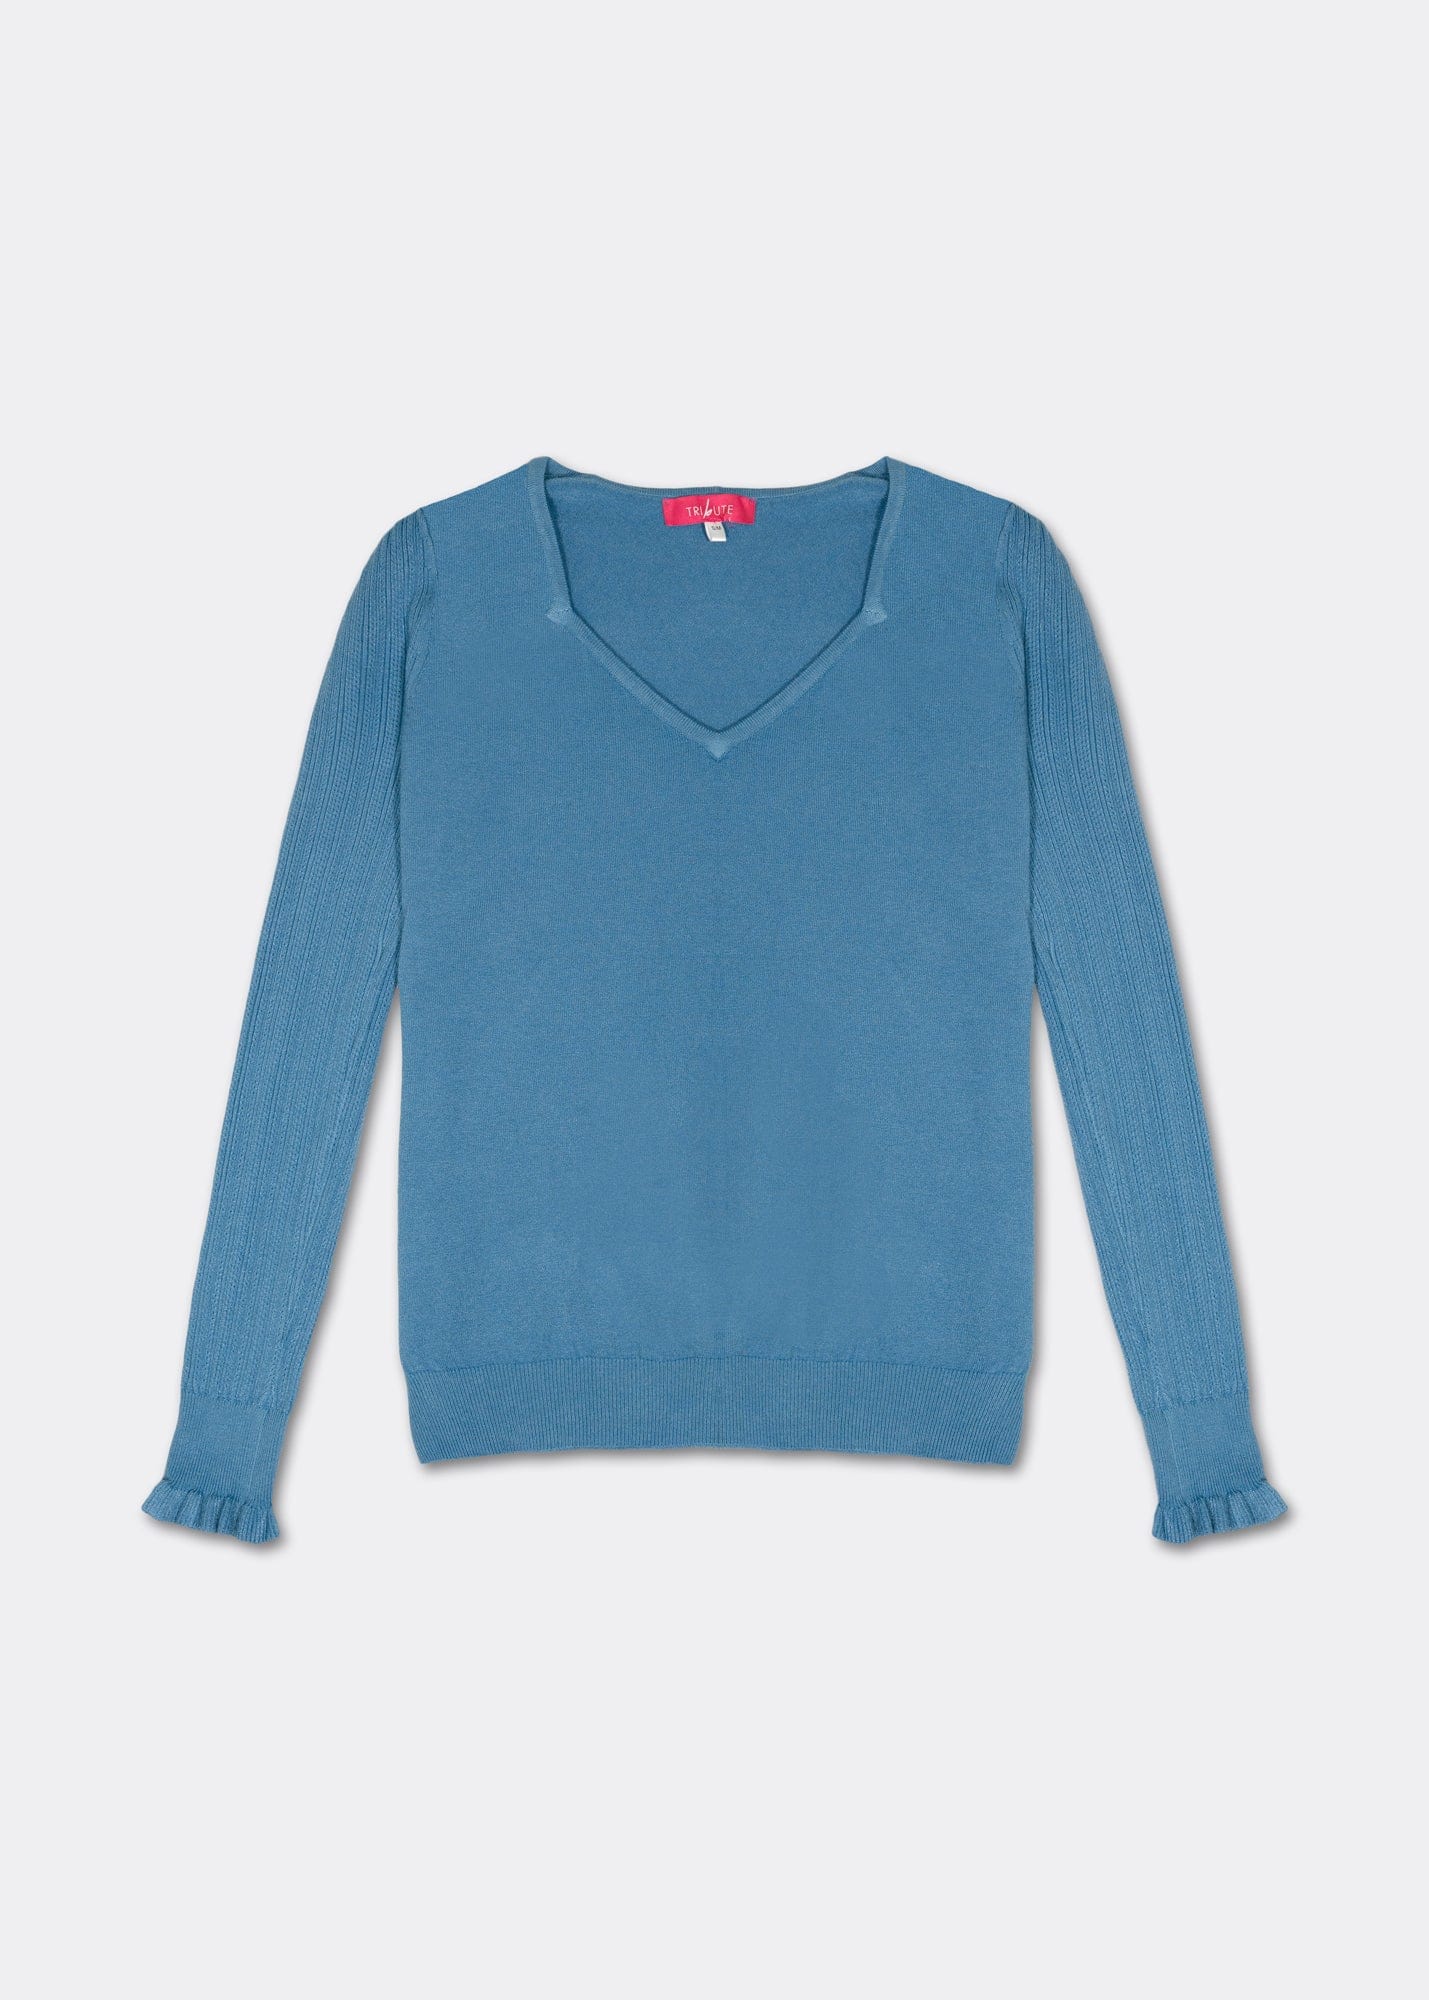 Sweetheart Knit in French Blue - Tribute StoreTRIBUTE